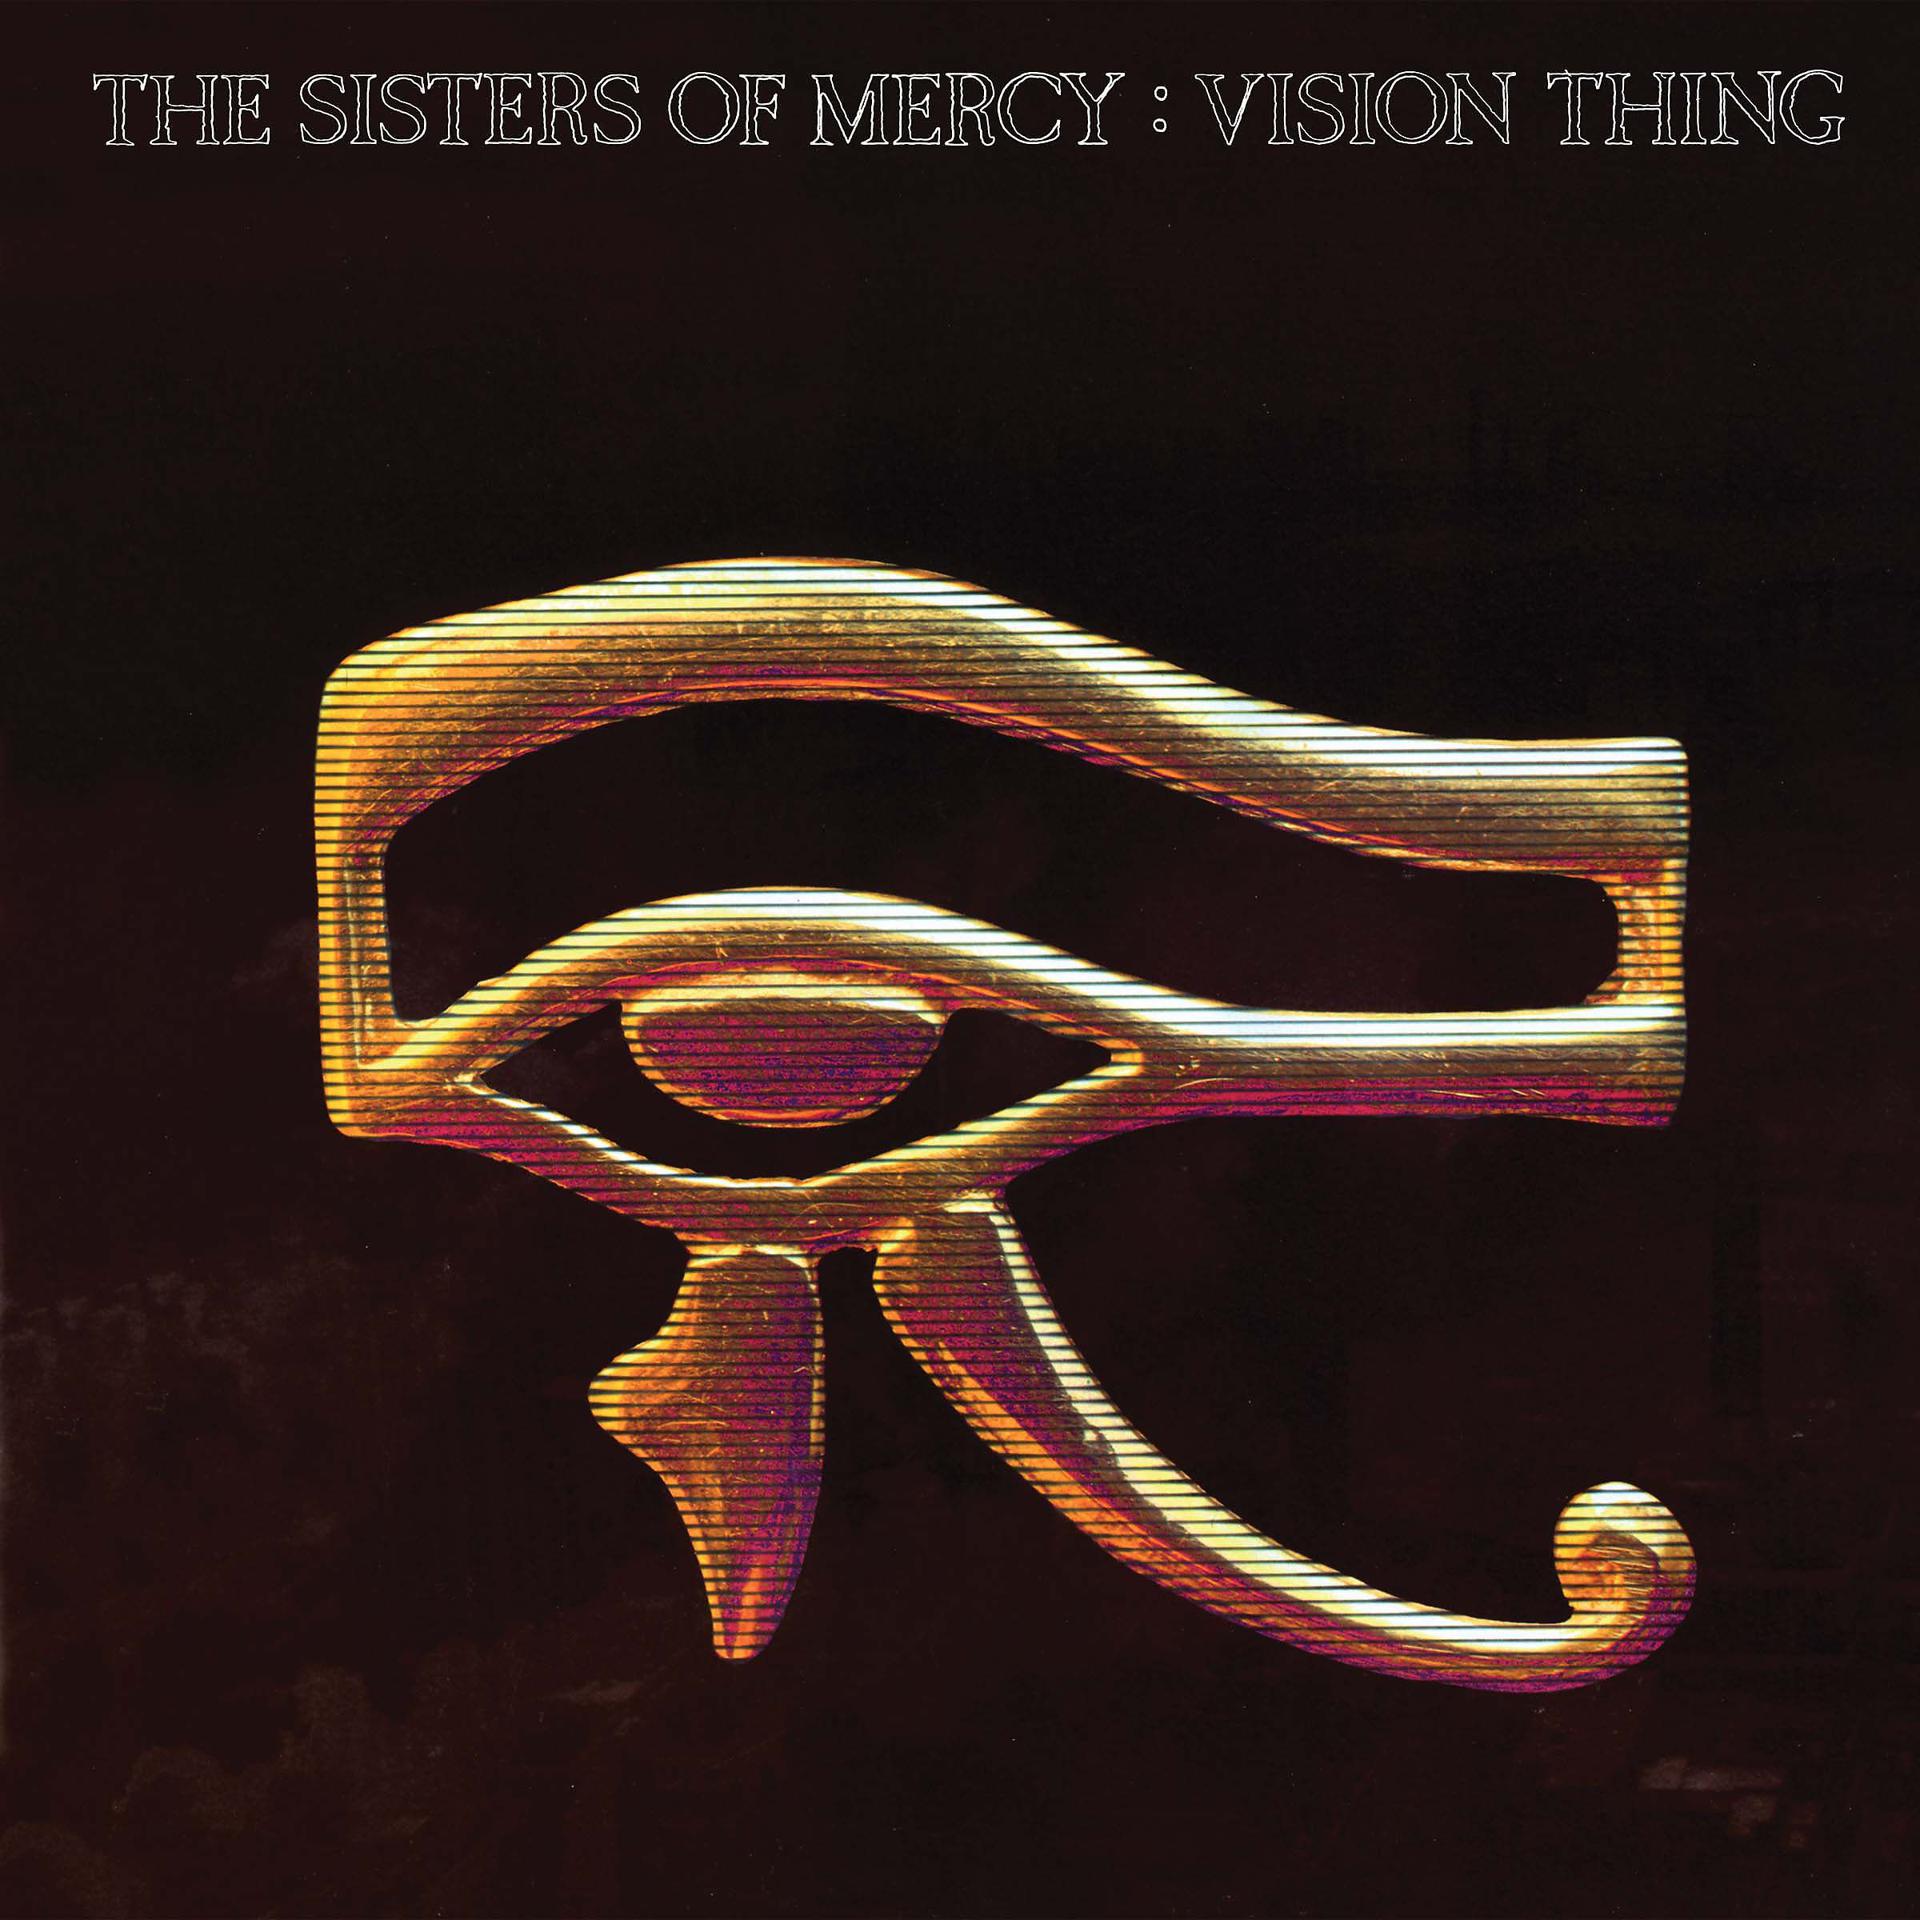 Something fast. The sisters of Mercy Vision thing 2006. The sisters of Mercy album. The sisters of Mercy - Vision thing (1990). Sisters of Mercy more.